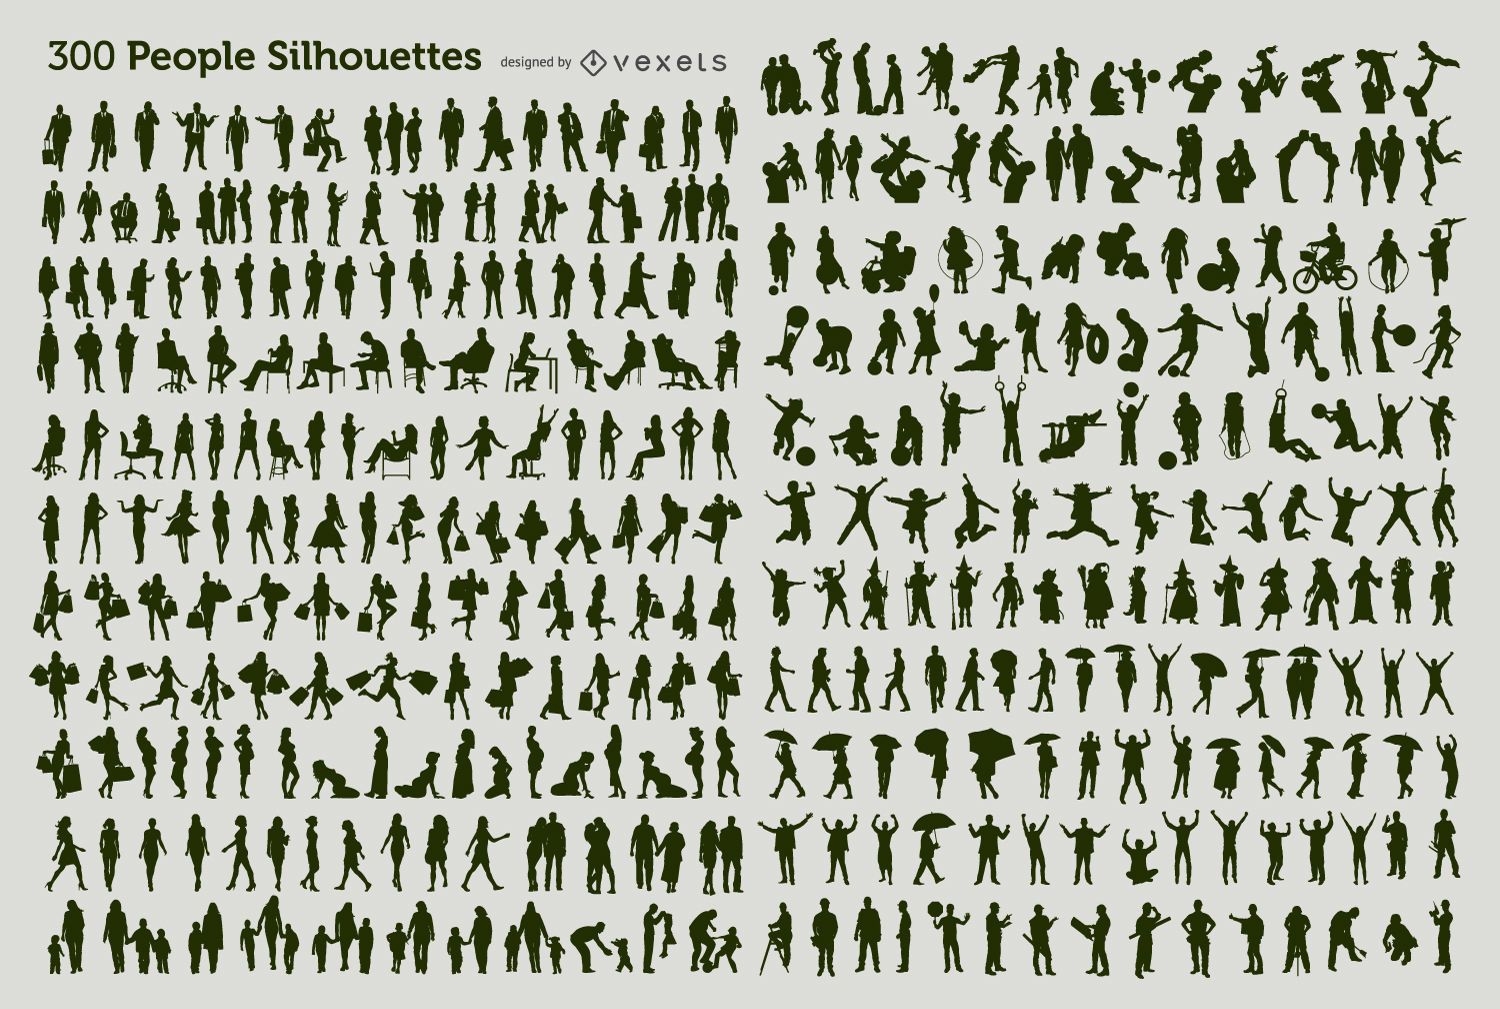 300 people silhouettes